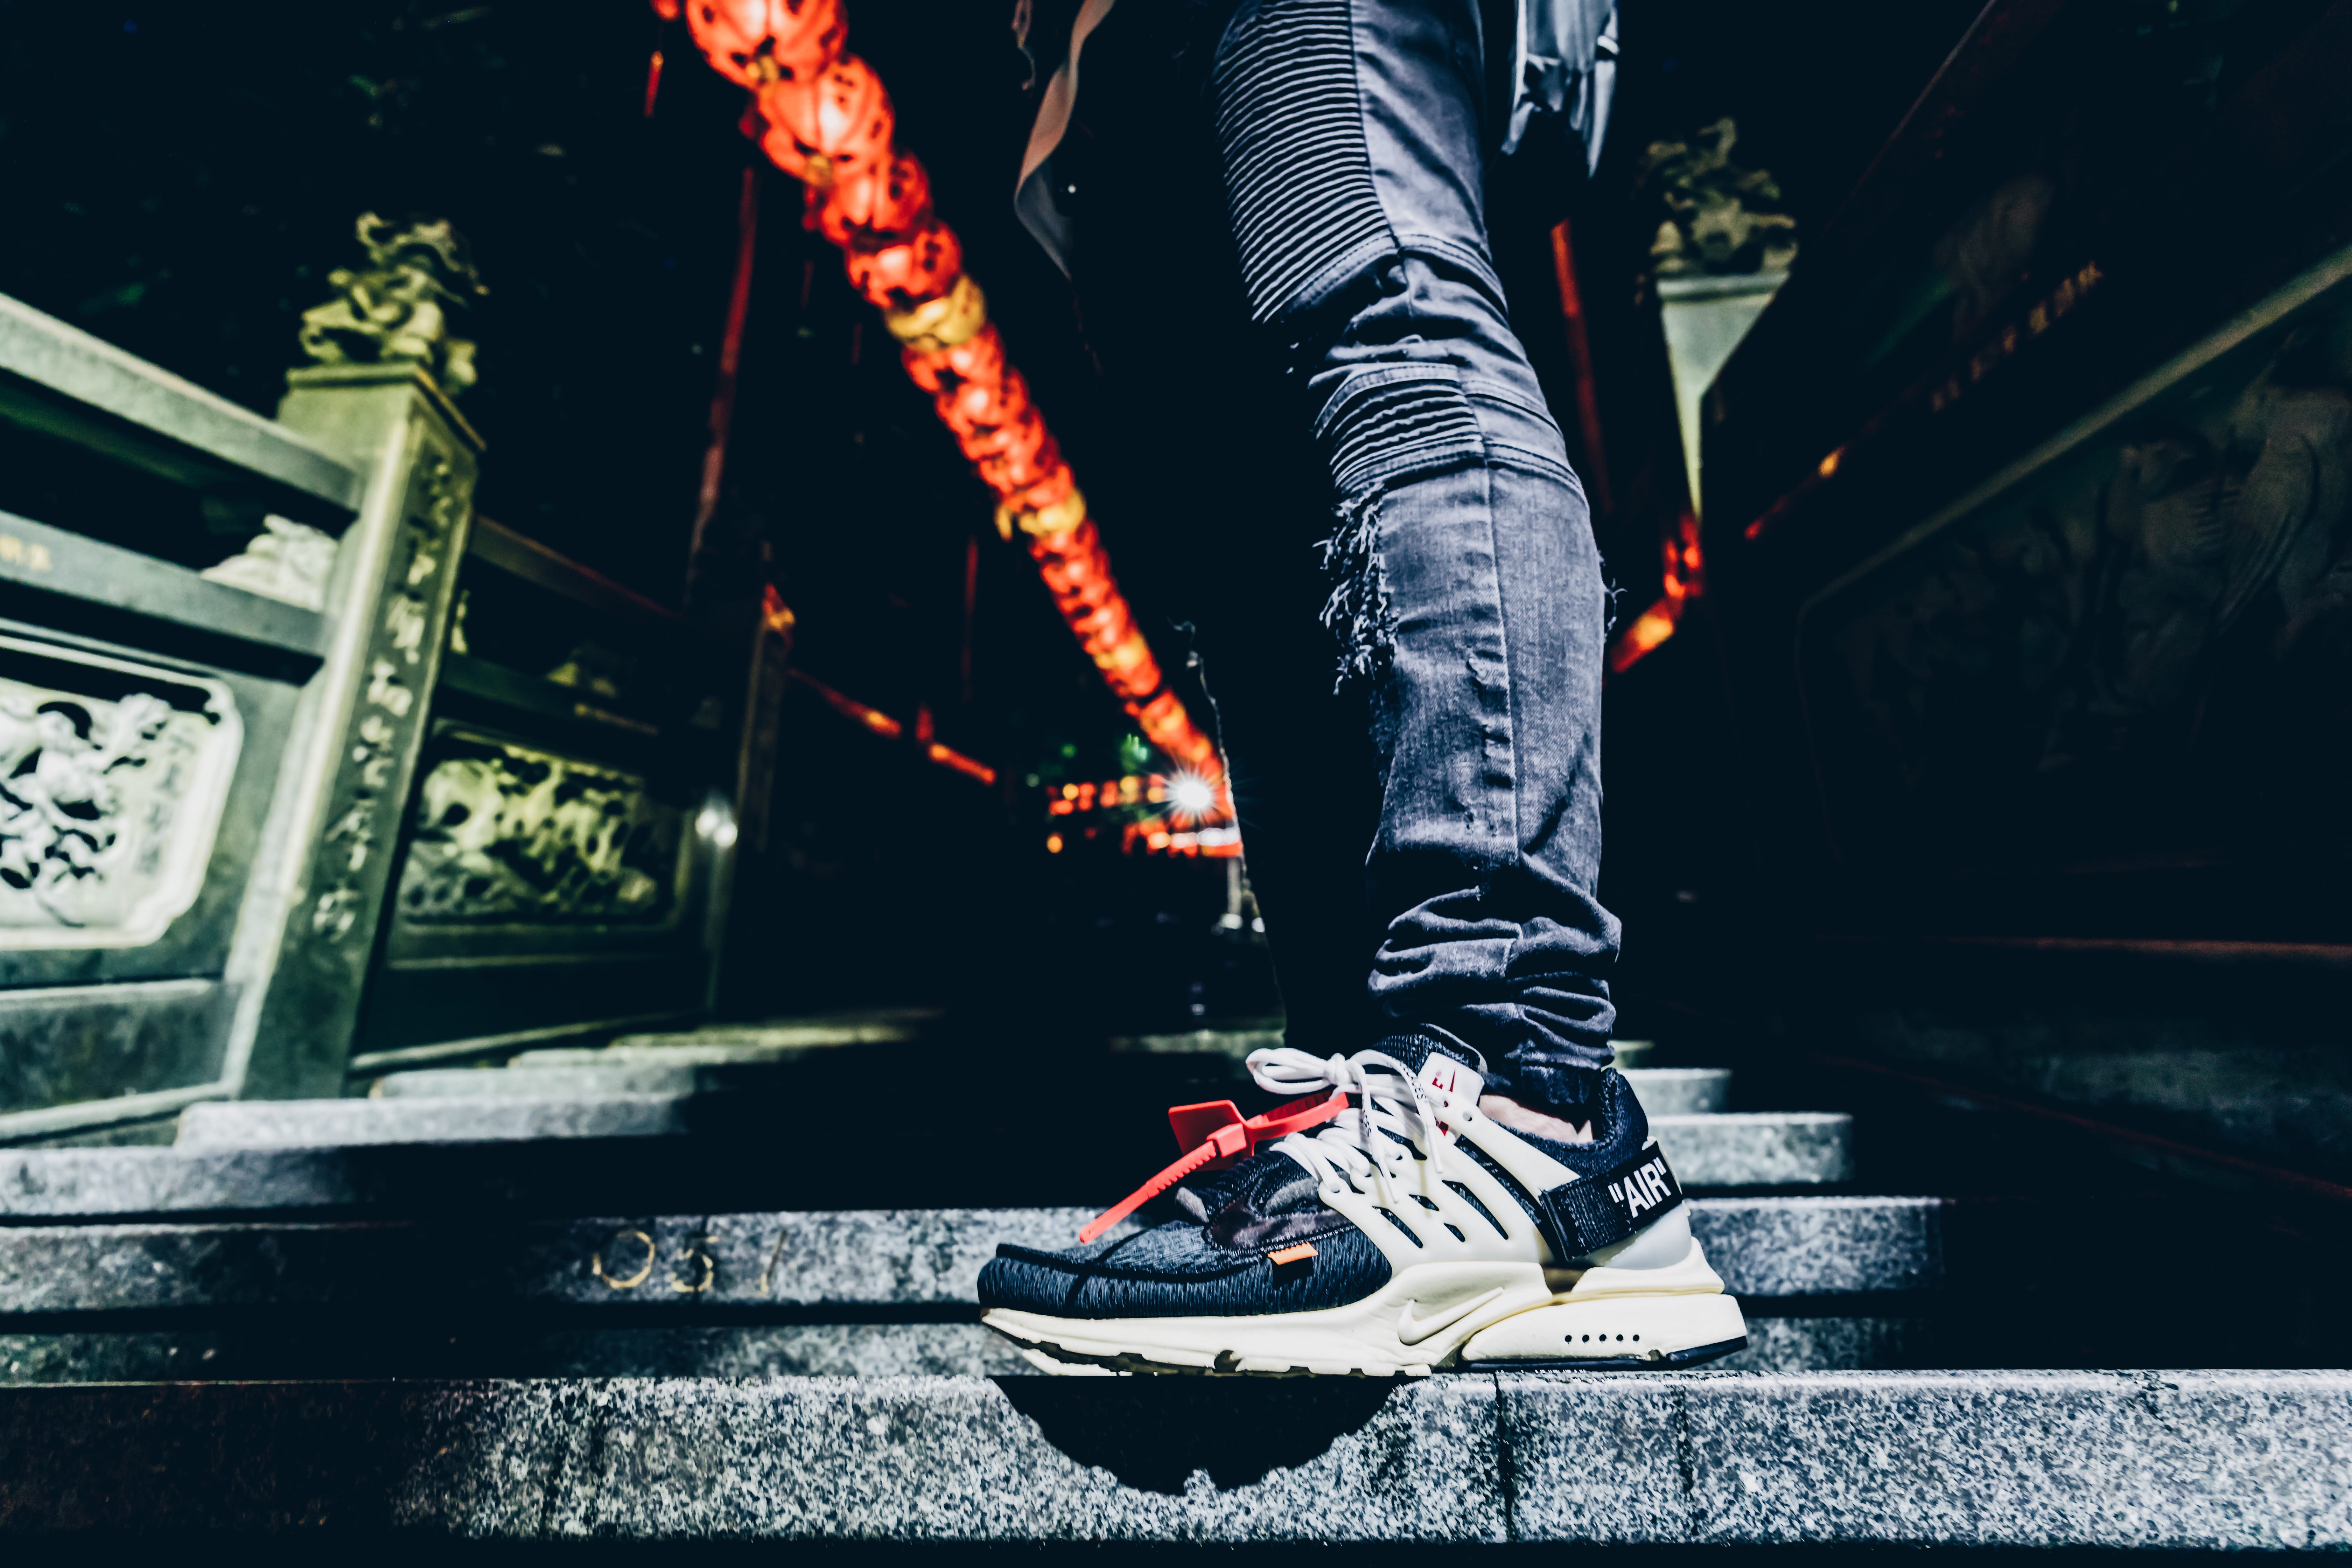 miscellanea, miscellaneous, sneakers, stairs, ladder, jeans, leg, sneaker